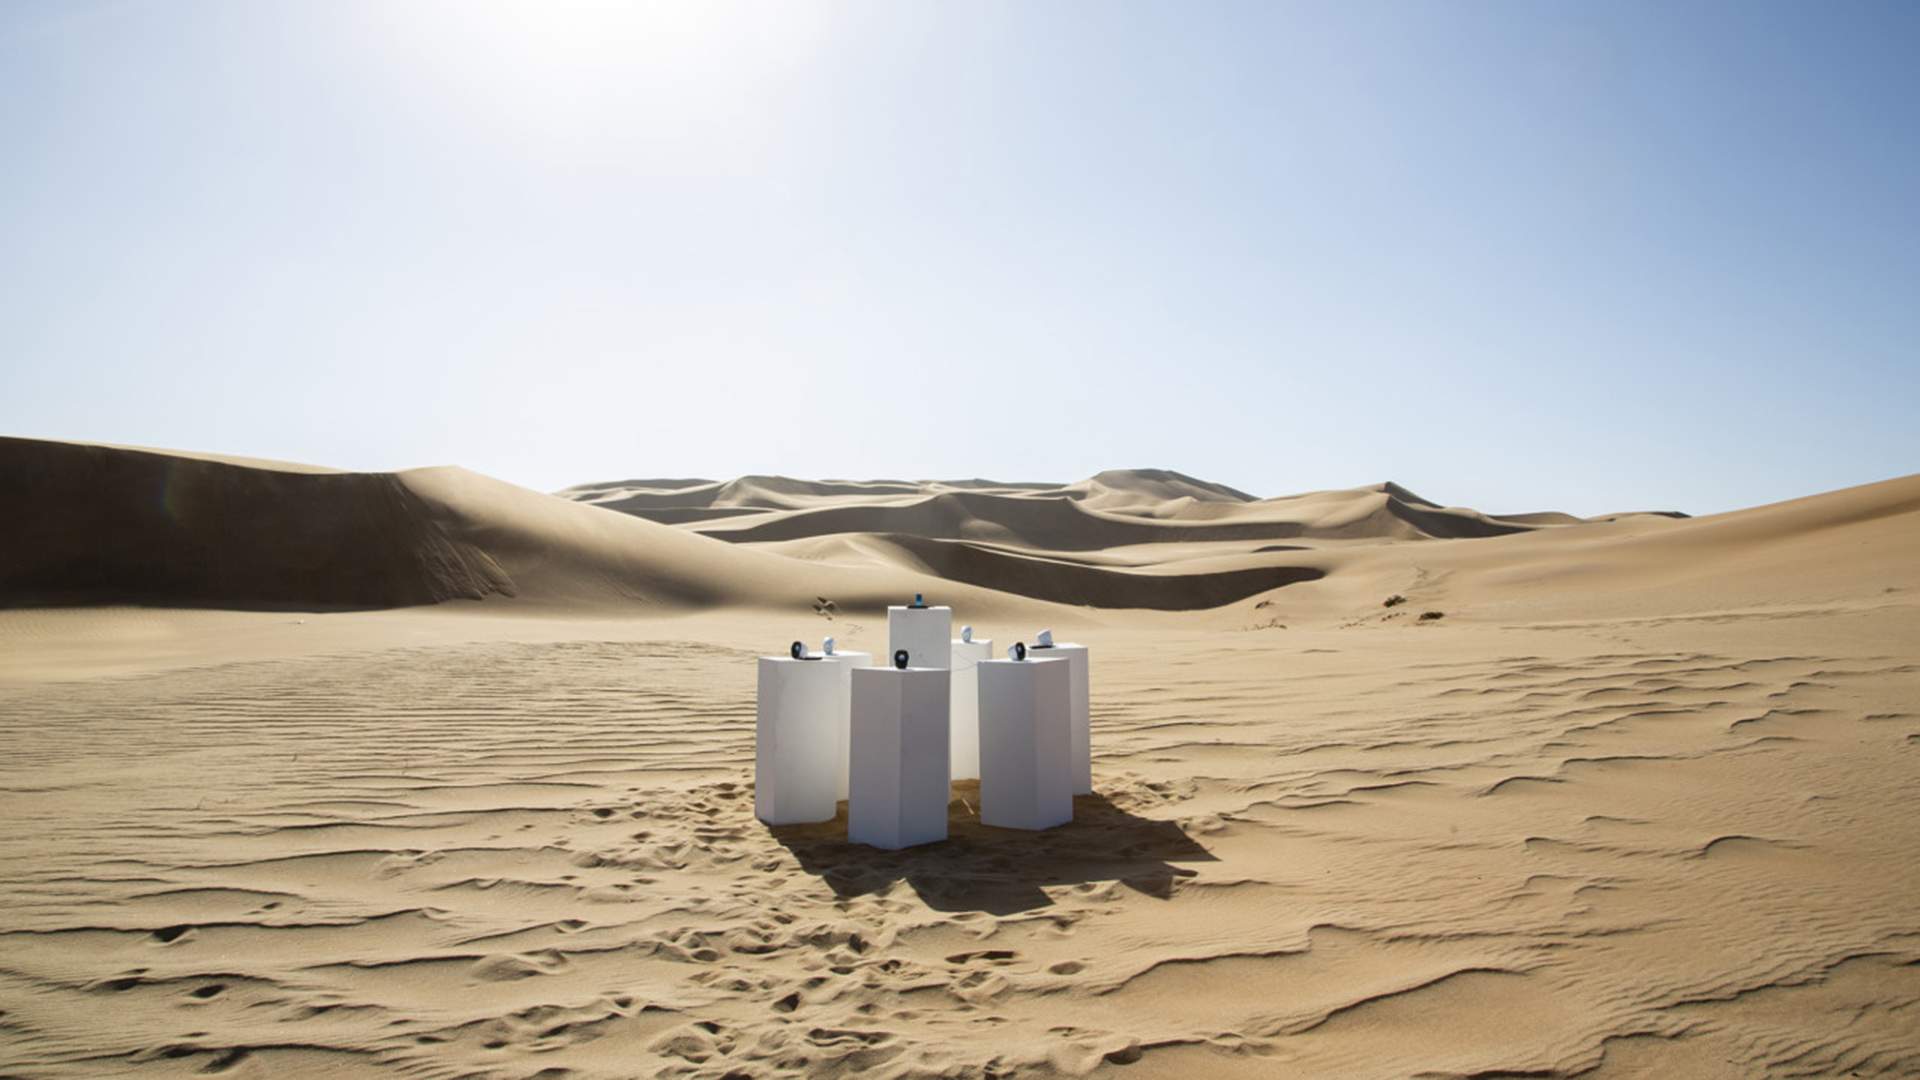 This New Art Installation Is Playing Toto's 'Africa' Non-Stop in the African Desert